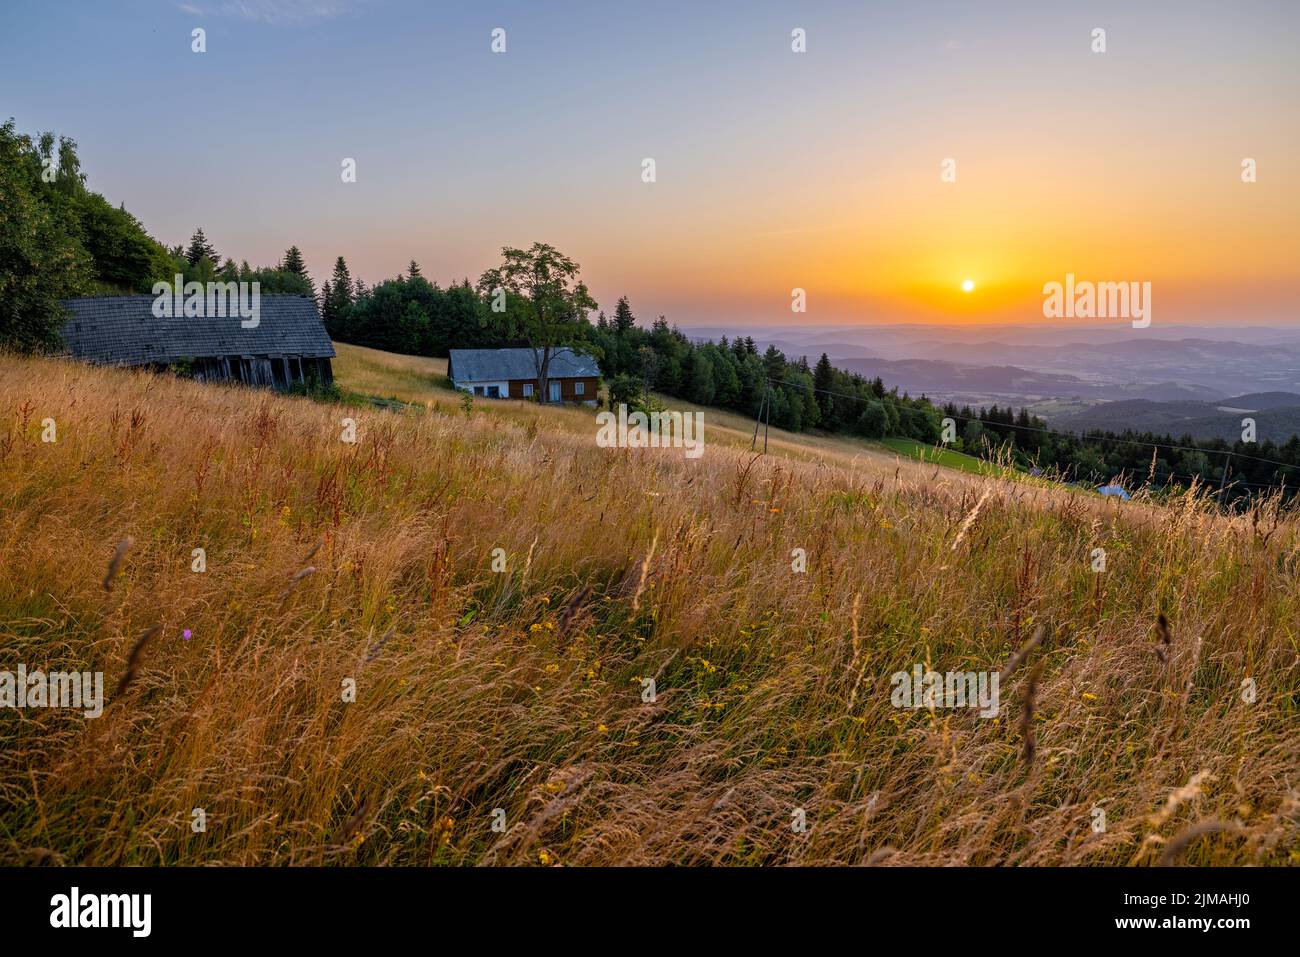 Green meadow on the hill at sunrise, mountains and forest in the background. No people, clear sky, two old buildings at the main scene Stock Photo